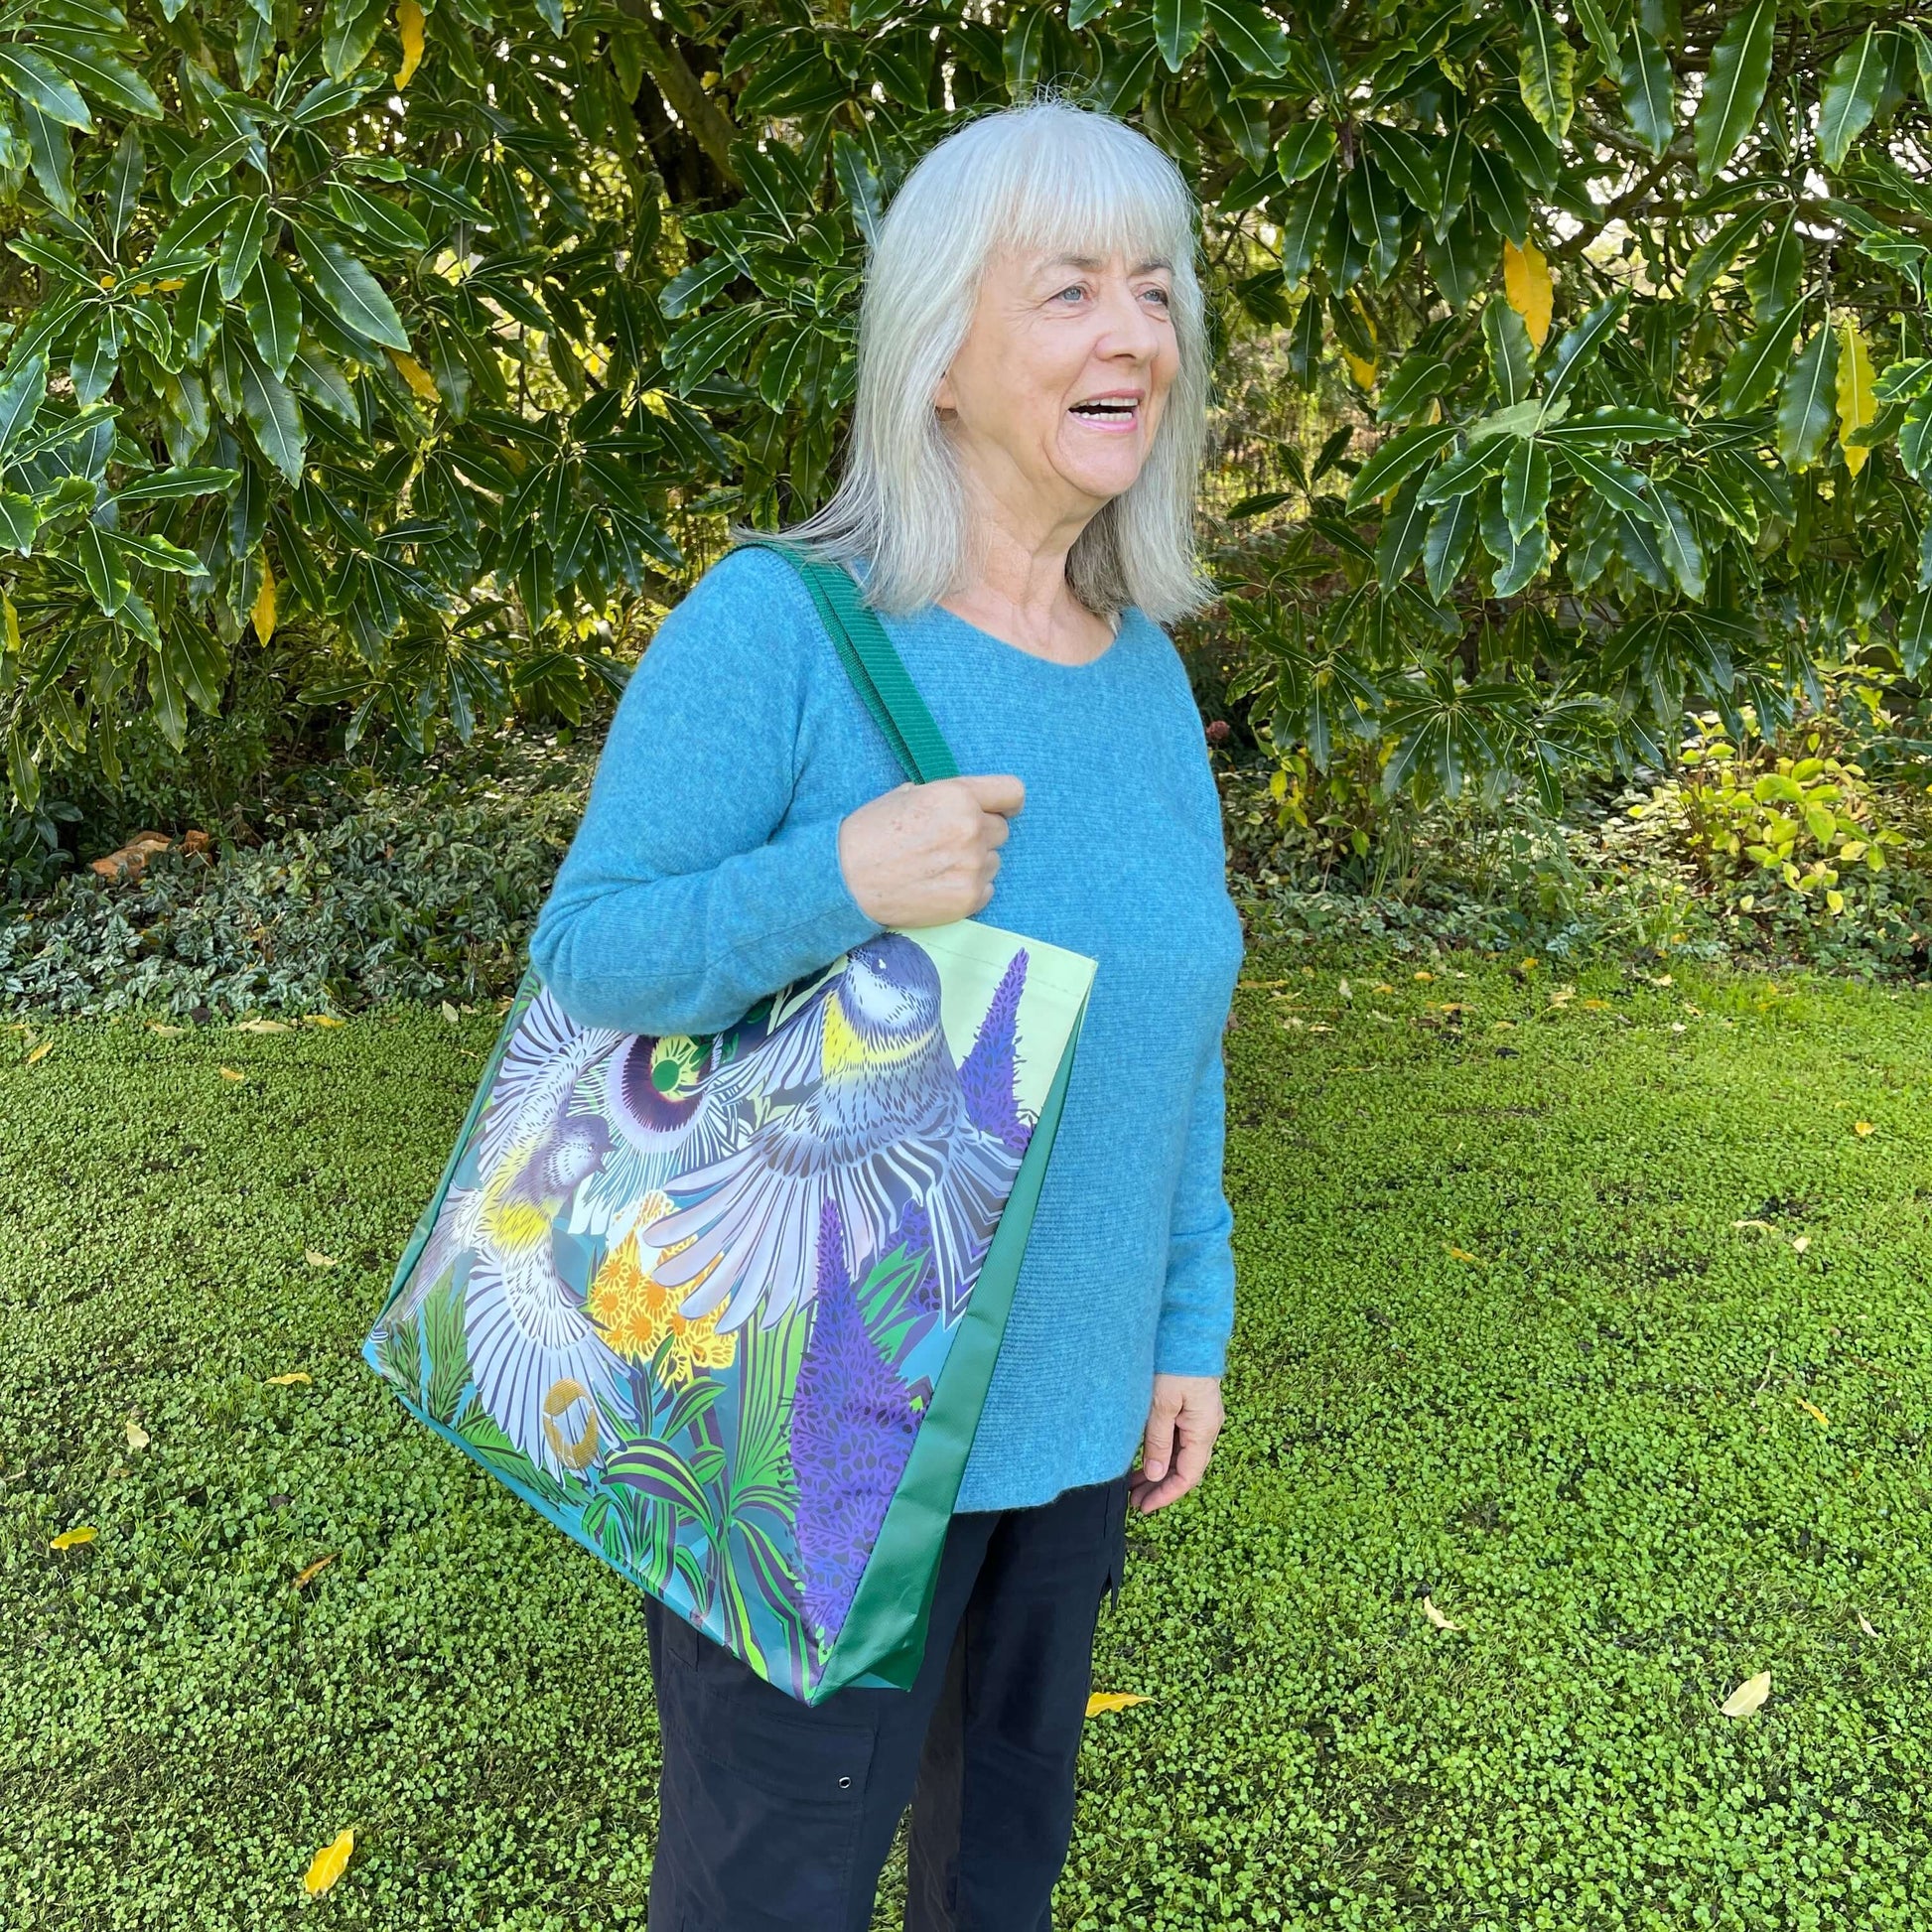 Woman with a tote bag over her arm. The vibrant coloured tote bag features Miromiro birds by artist Flox.